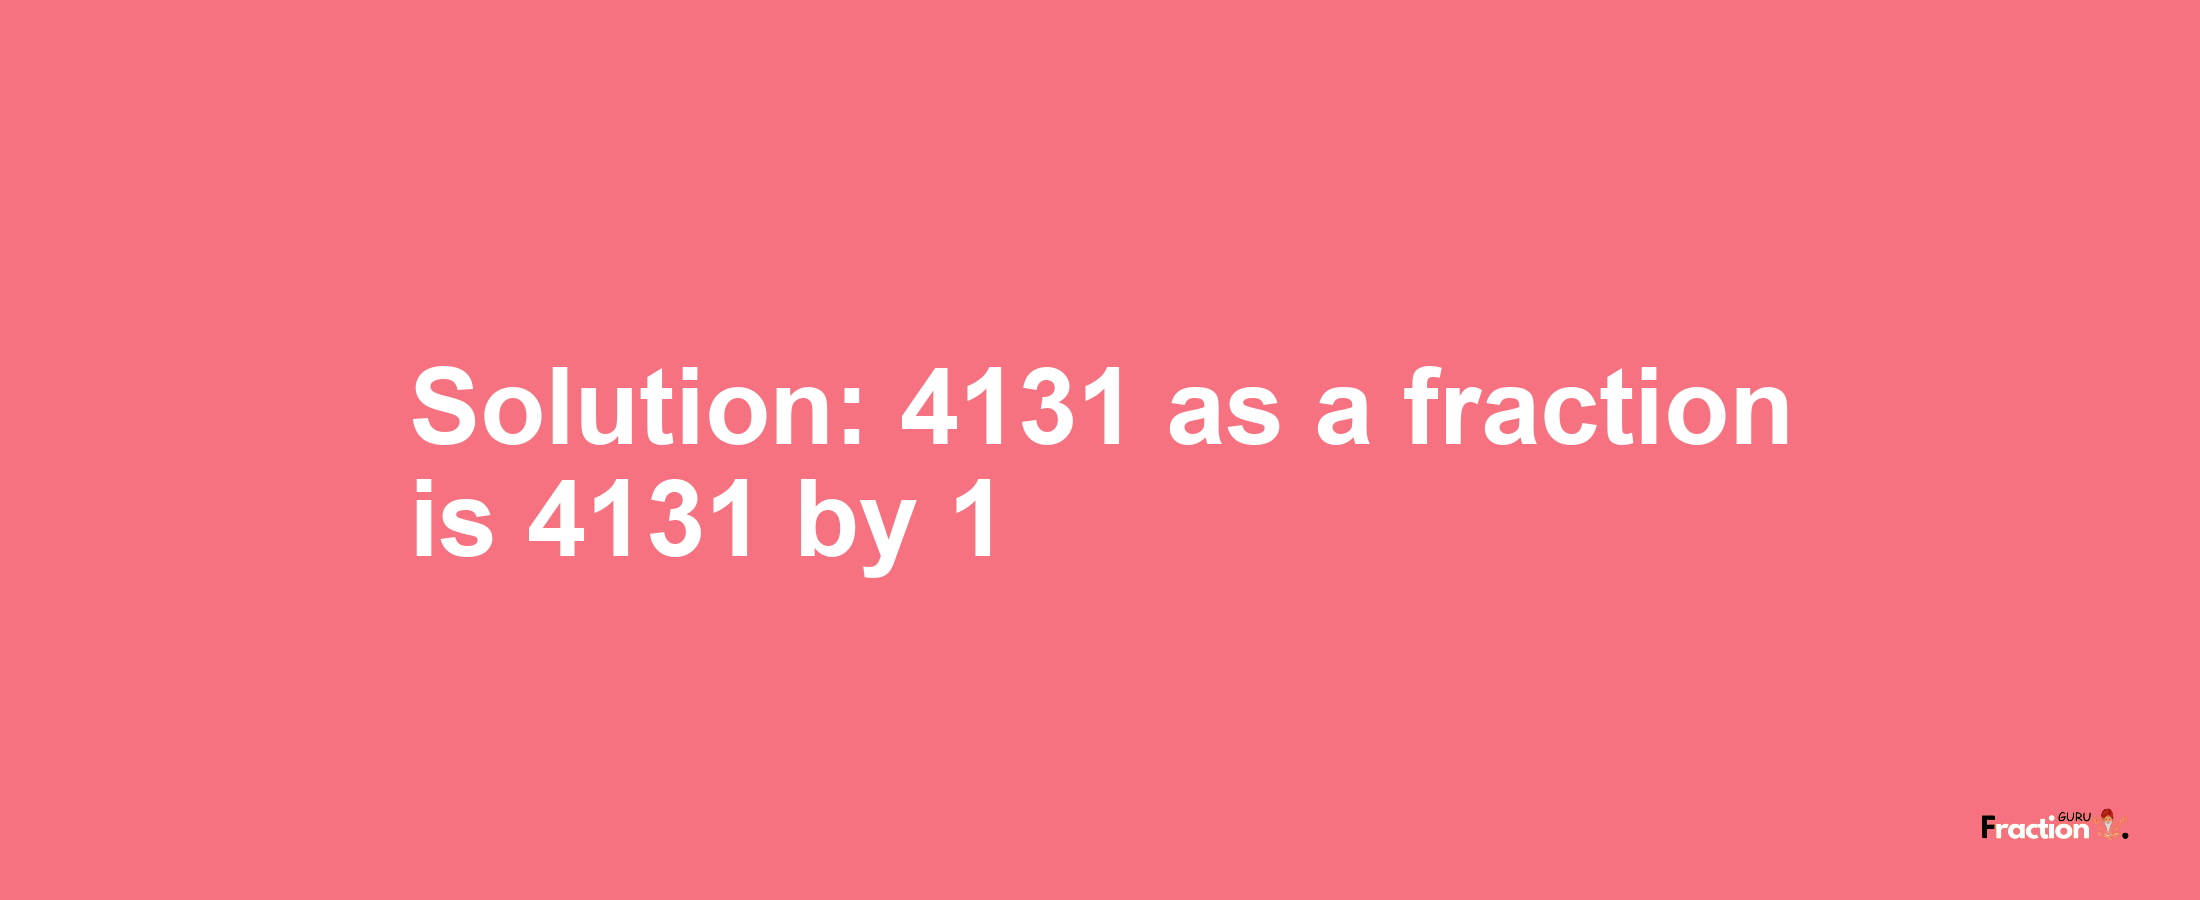 Solution:4131 as a fraction is 4131/1